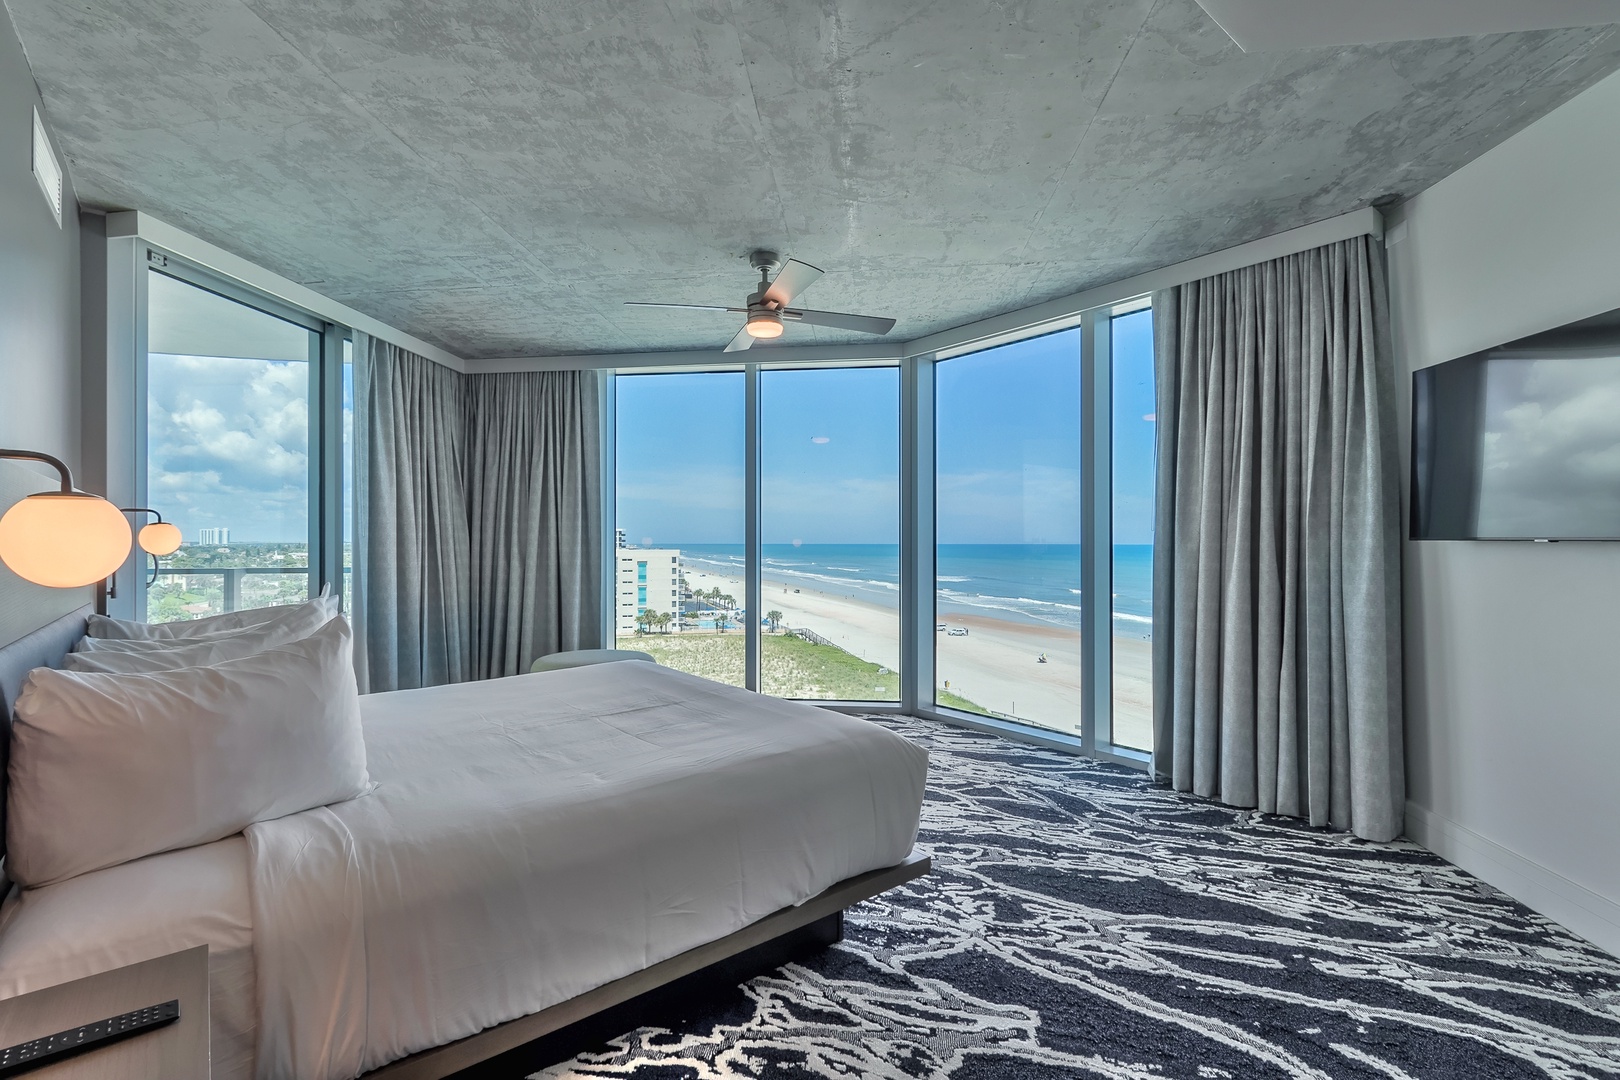 Seaside Serenity: Relax and Recharge in the Comfort of Your Ocean-View Master Suite